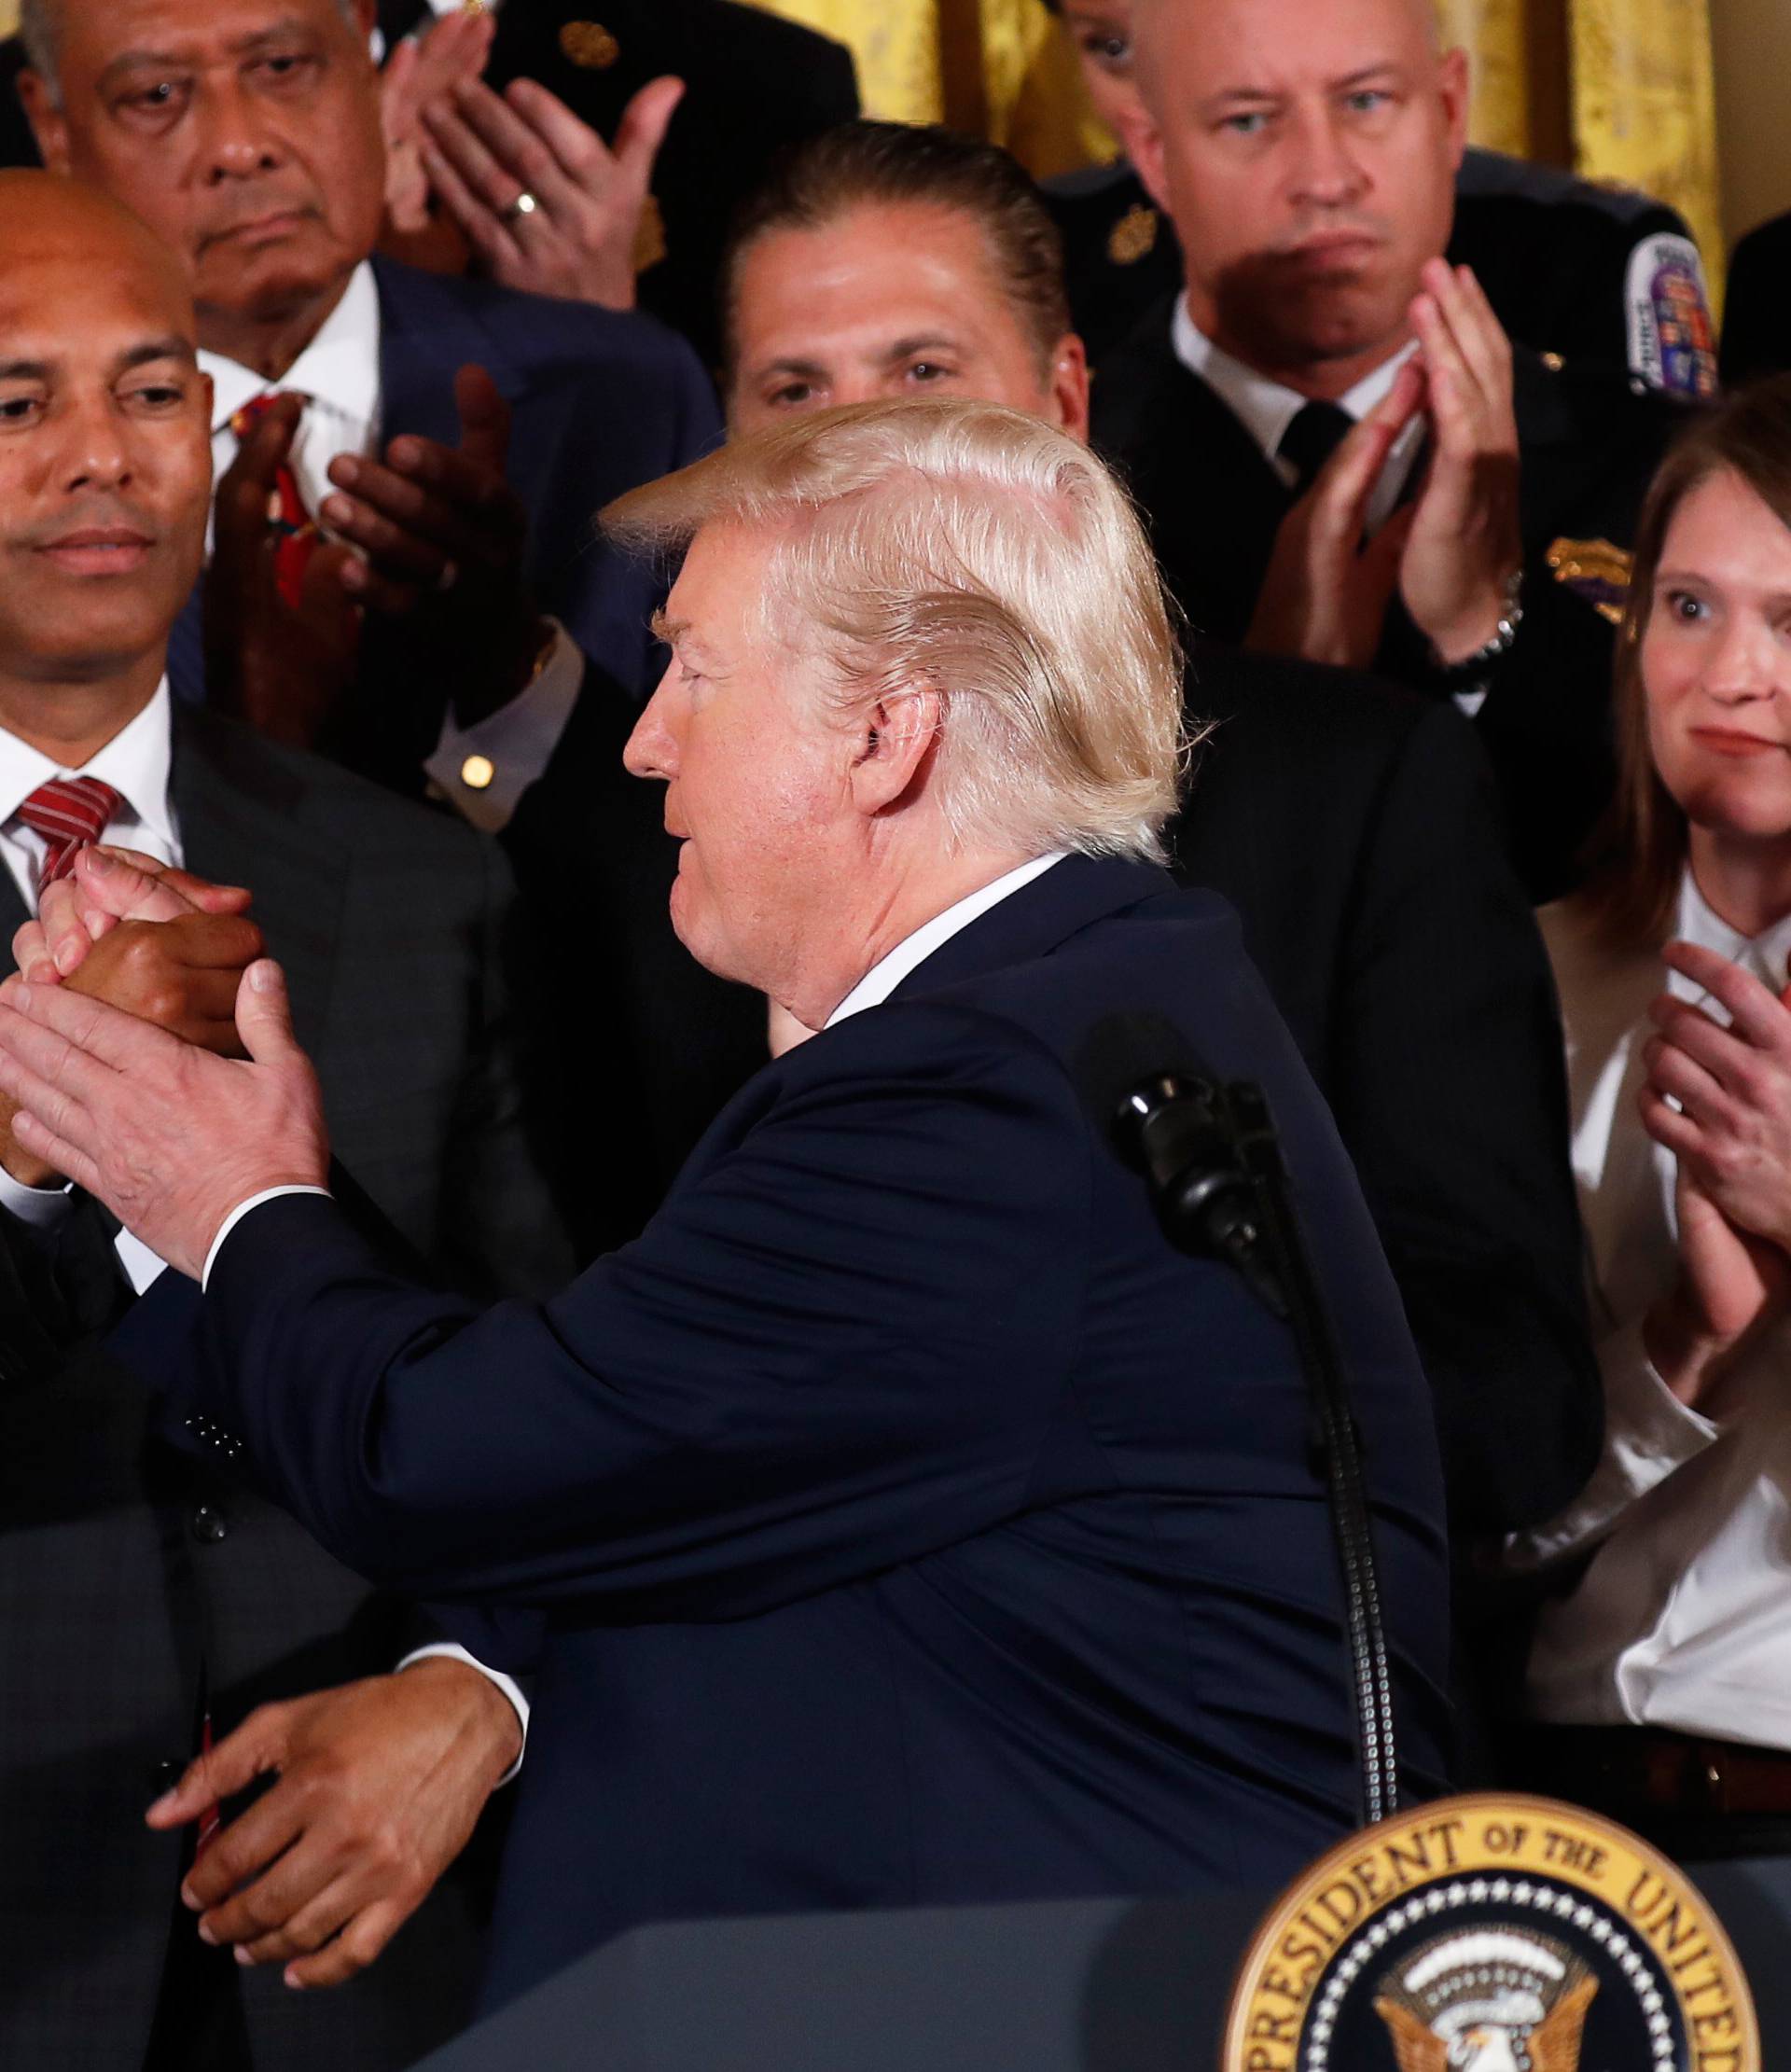 U.S. President Donald Trump greets former New York Yankees pitcher Mariano Rivera before he speaks about administration plans to combat the nation's opioid crisis in the East Room of the White House in Washington